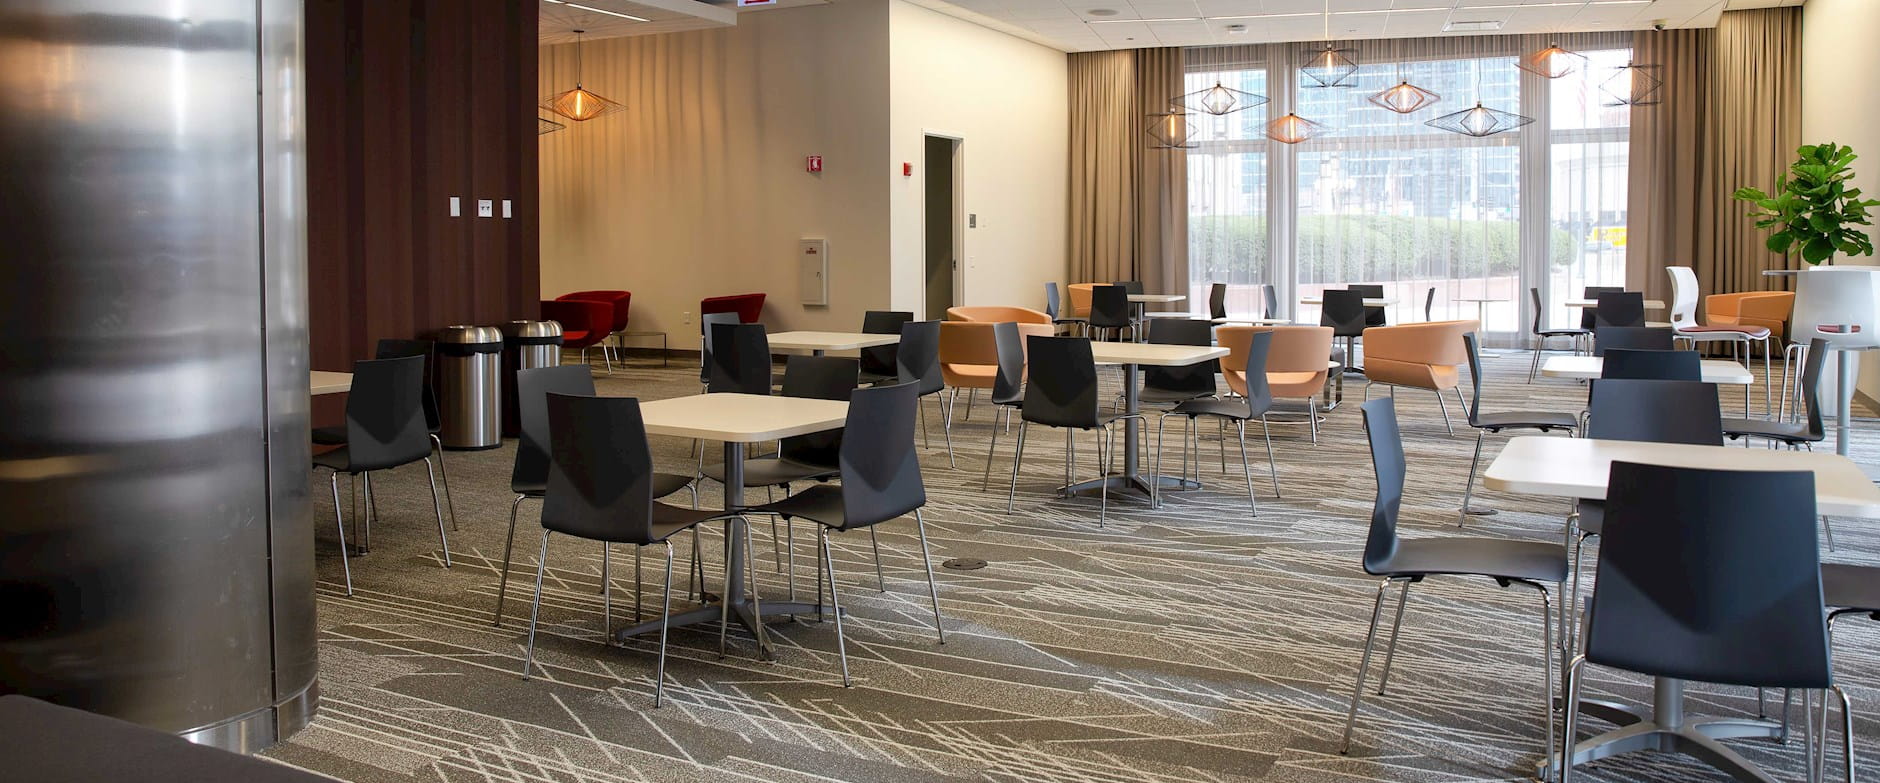 Gleacher Center lobby filled with square tables surrounded by chairs looking toward an inviting window